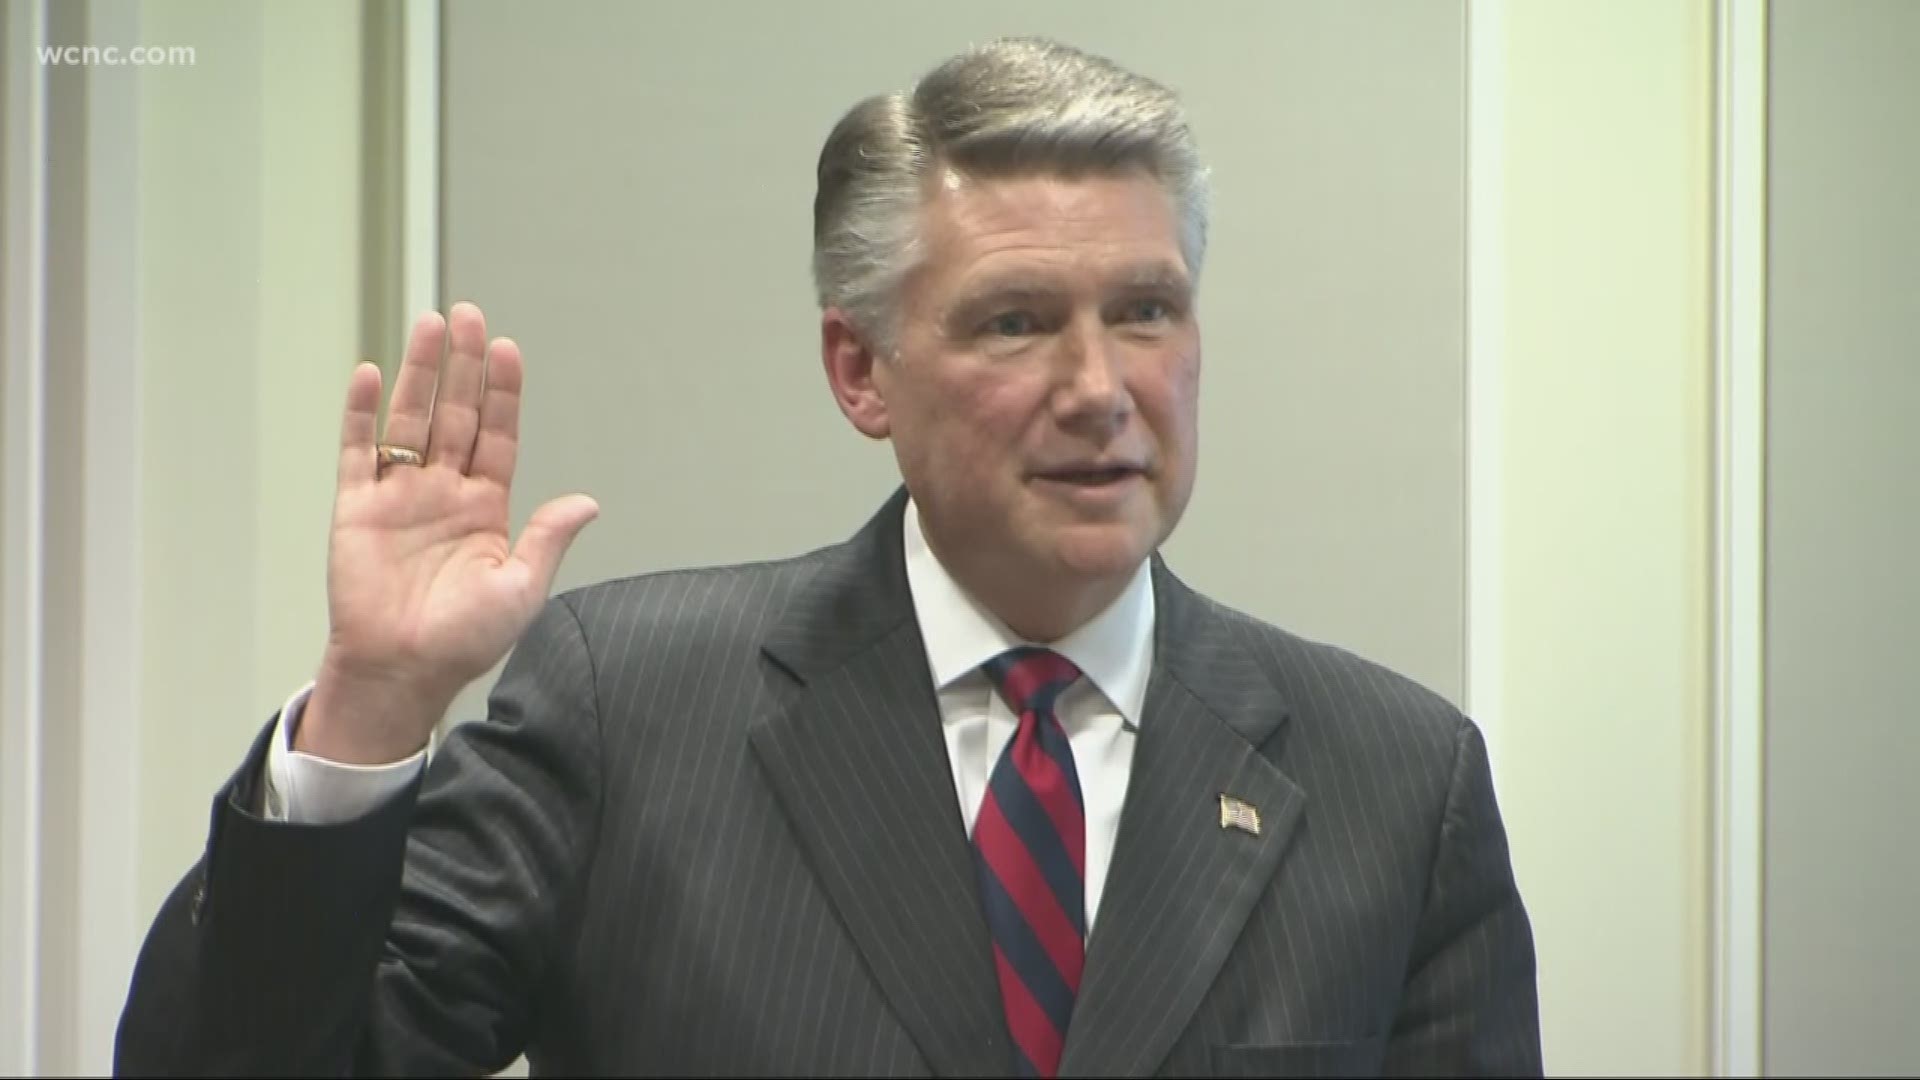 Republican Mark Harris took the stand Thursday in the state's investigation of an alleged illegal absentee ballot operation run by a man hired by Harris' campaign during the 9th Congressional District race.